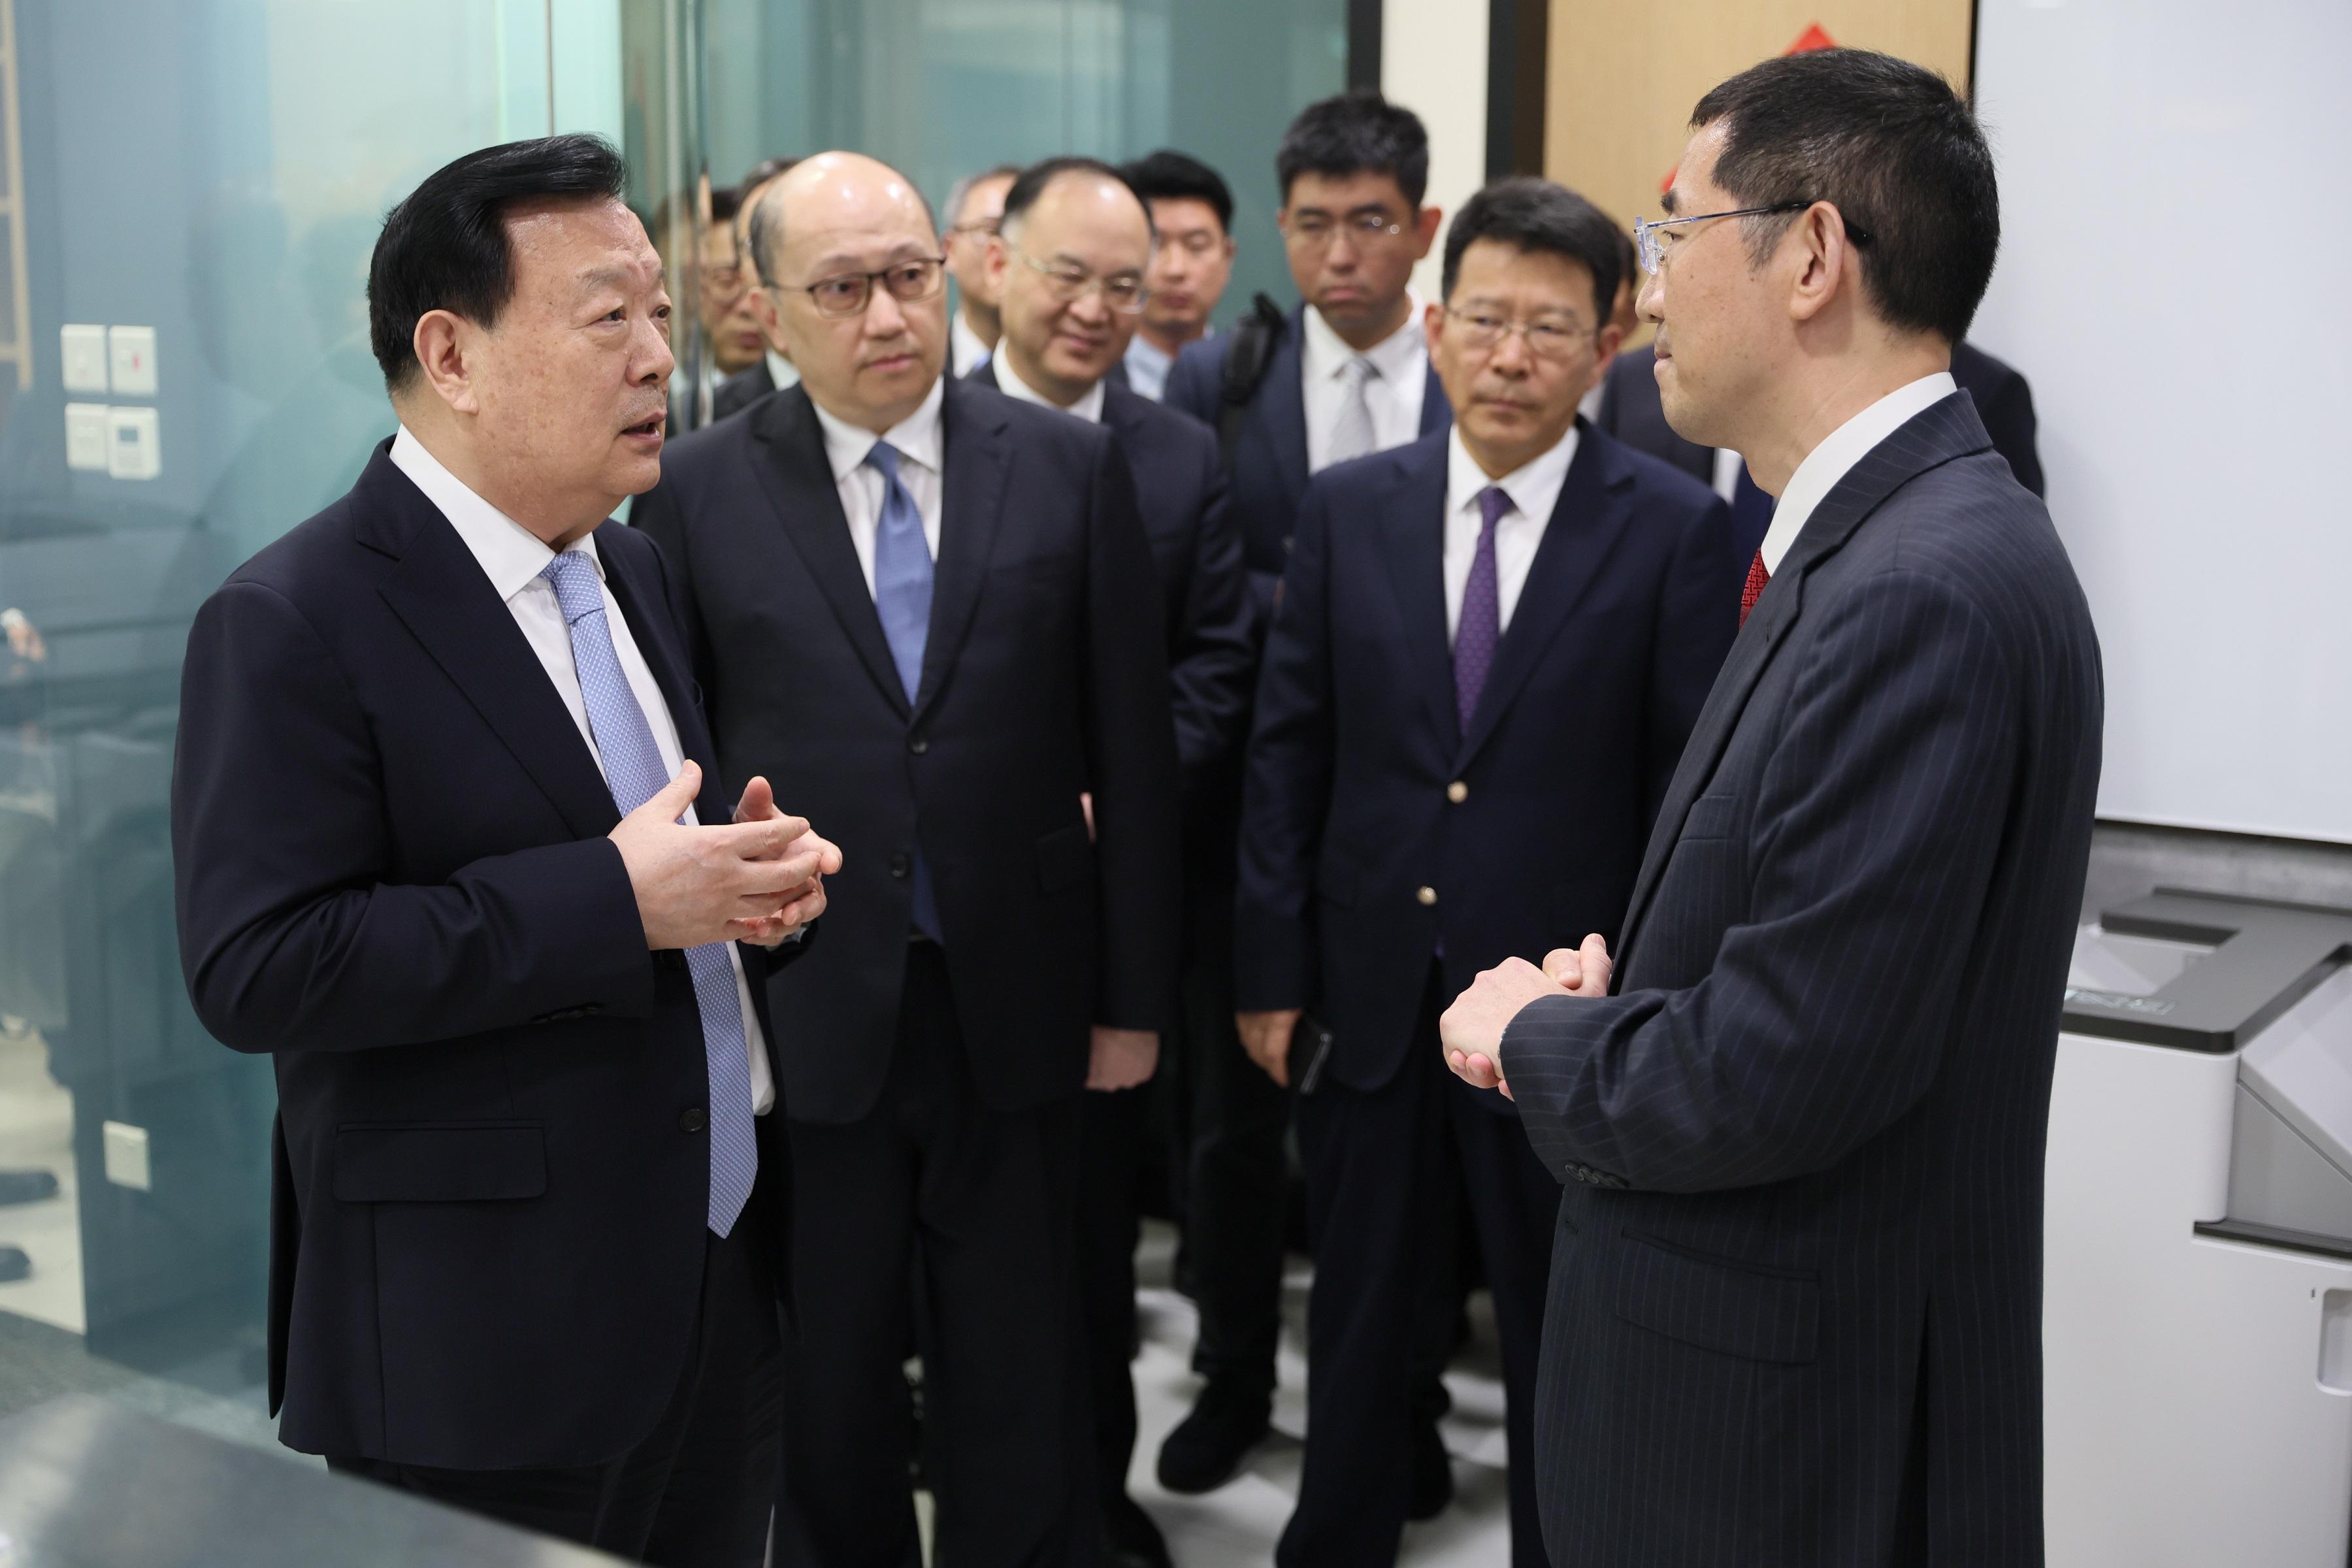 The Director of the Hong Kong and Macao Work Office of the Communist Party of China Central Committee and the Hong Kong and Macao Affairs Office of the State Council, Mr Xia Baolong, continued his inspection visit to Hong Kong today (February 23). Photo shows Mr Xia (first left) inspecting the International Organization for Mediation Preparatory Office and being briefed by the preparatory office’s Director-General, Dr Sun Jin (first right), on the preparatory work and progress of the office.